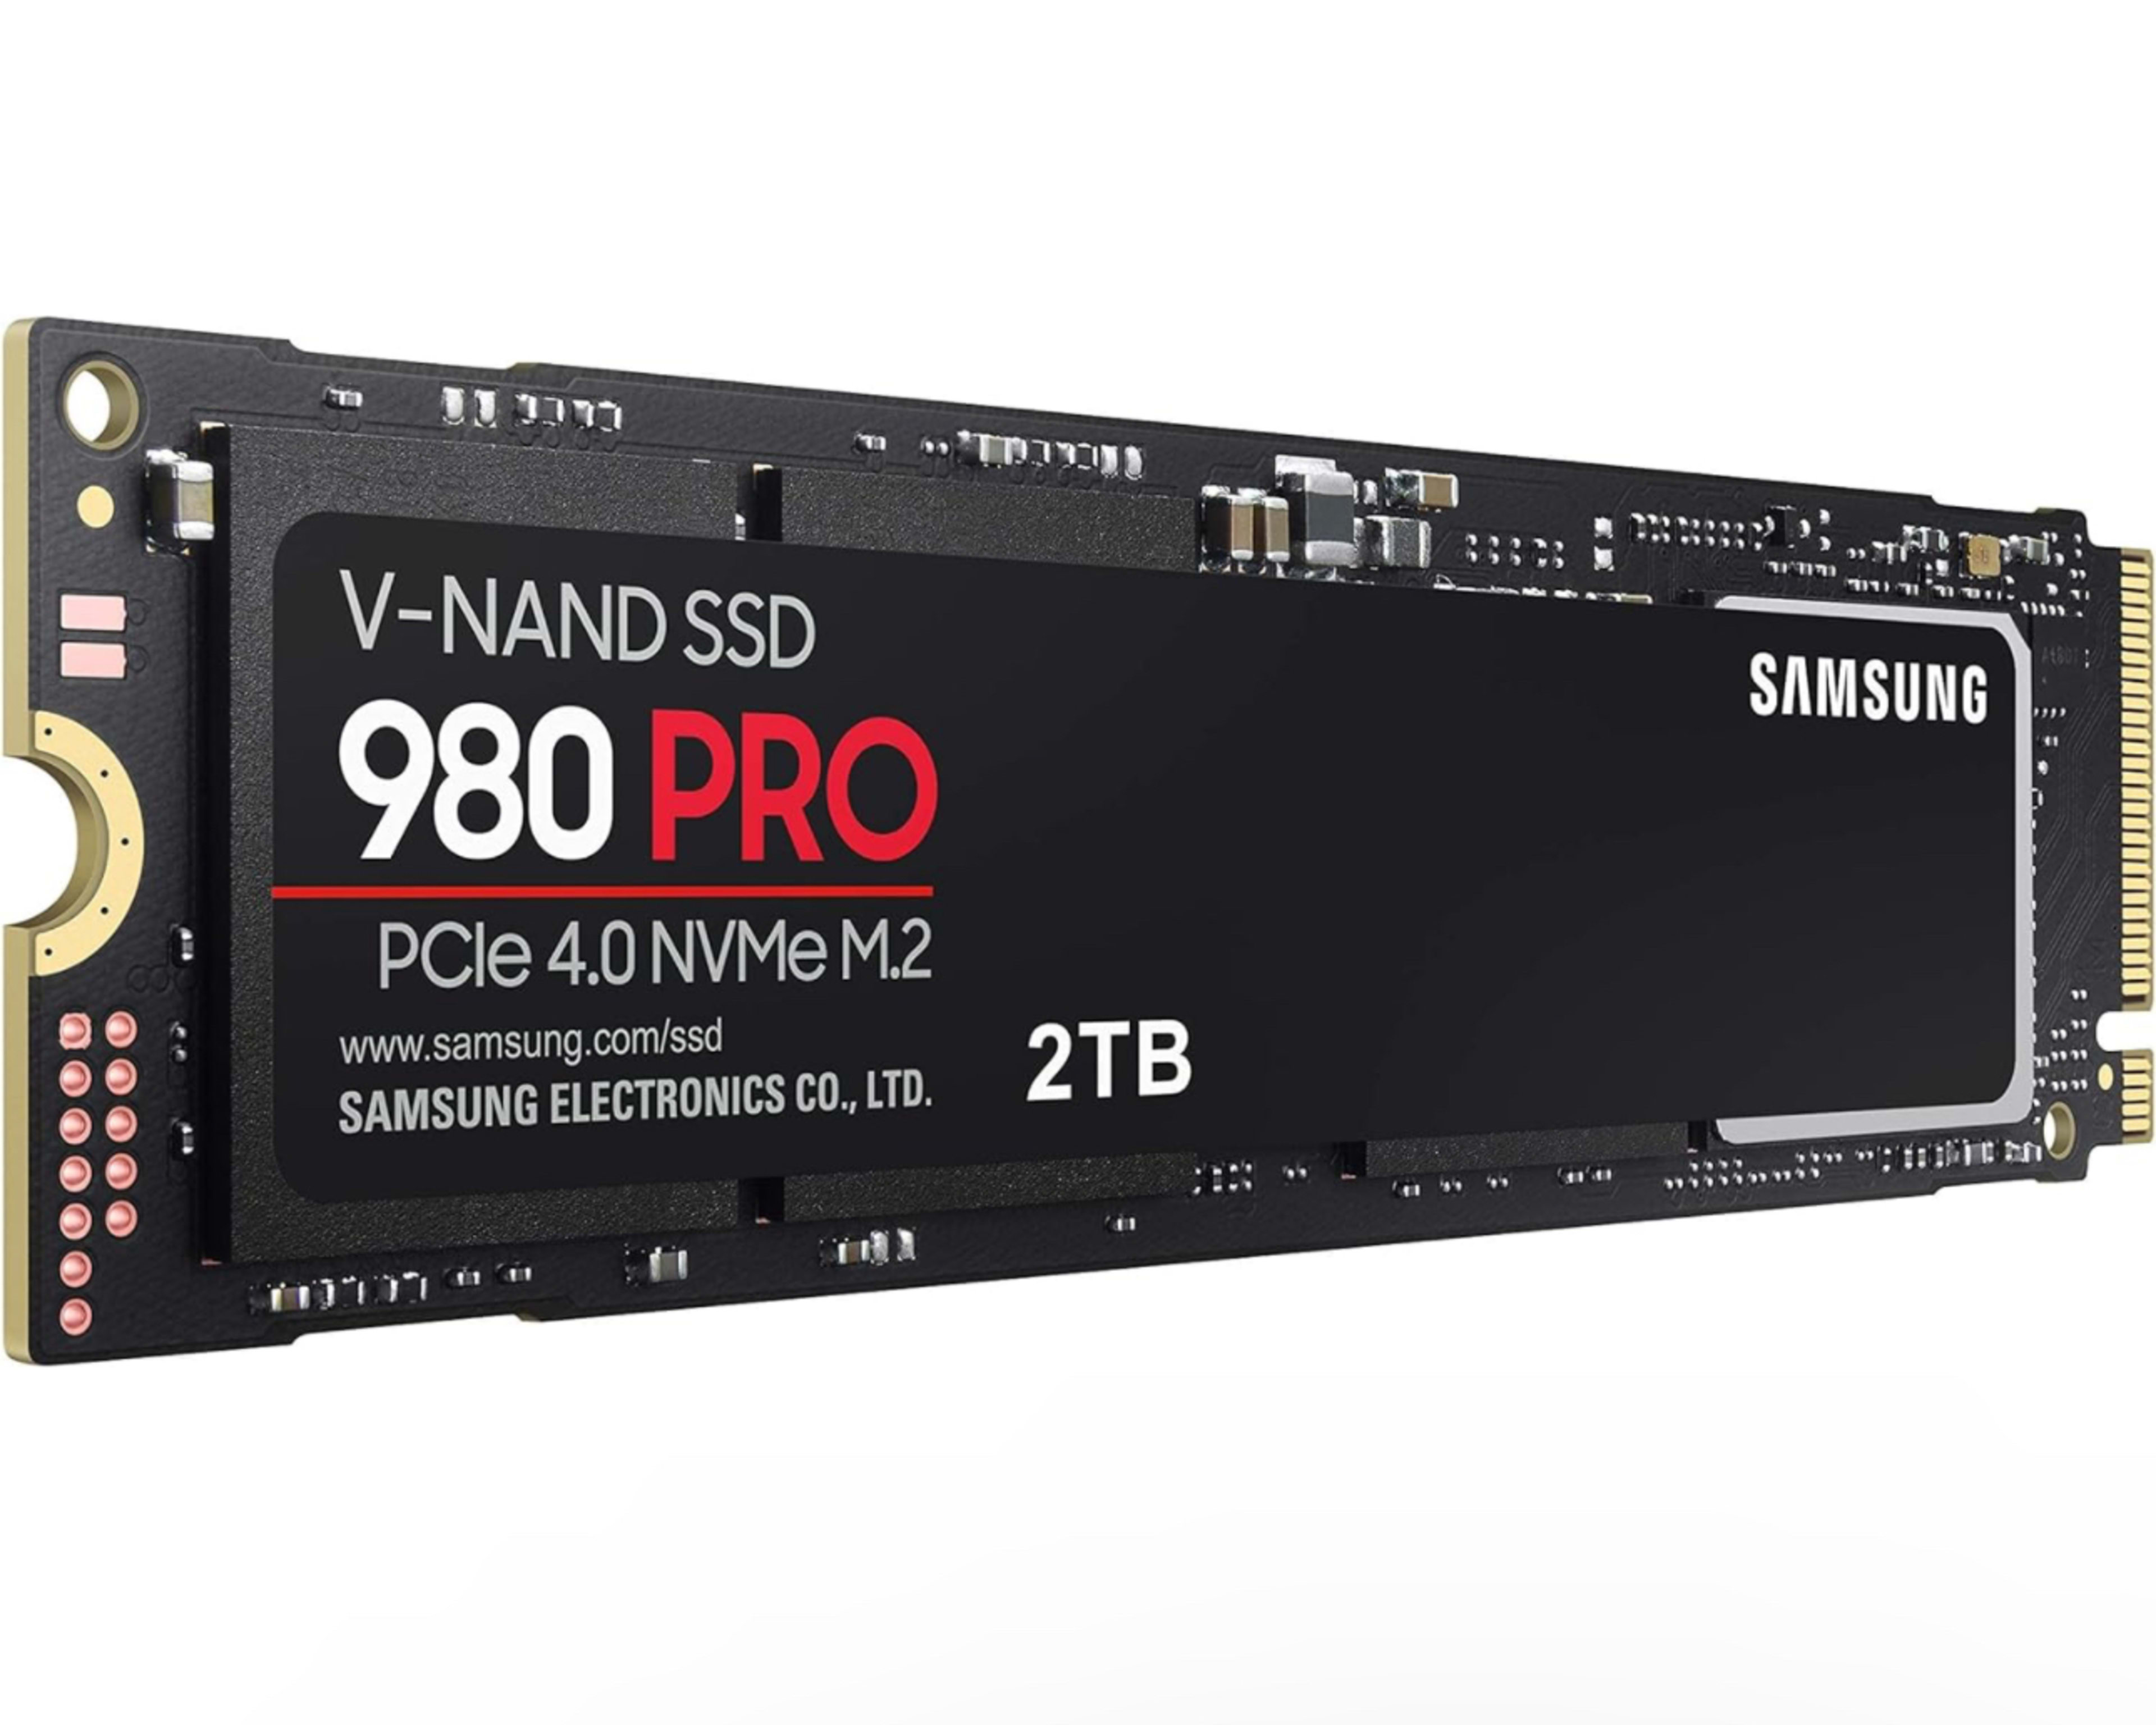 2TB SAMSUNG 980 PRO SSD PCIe NVMe Gen 4 Gaming M.2 Internal Solid State